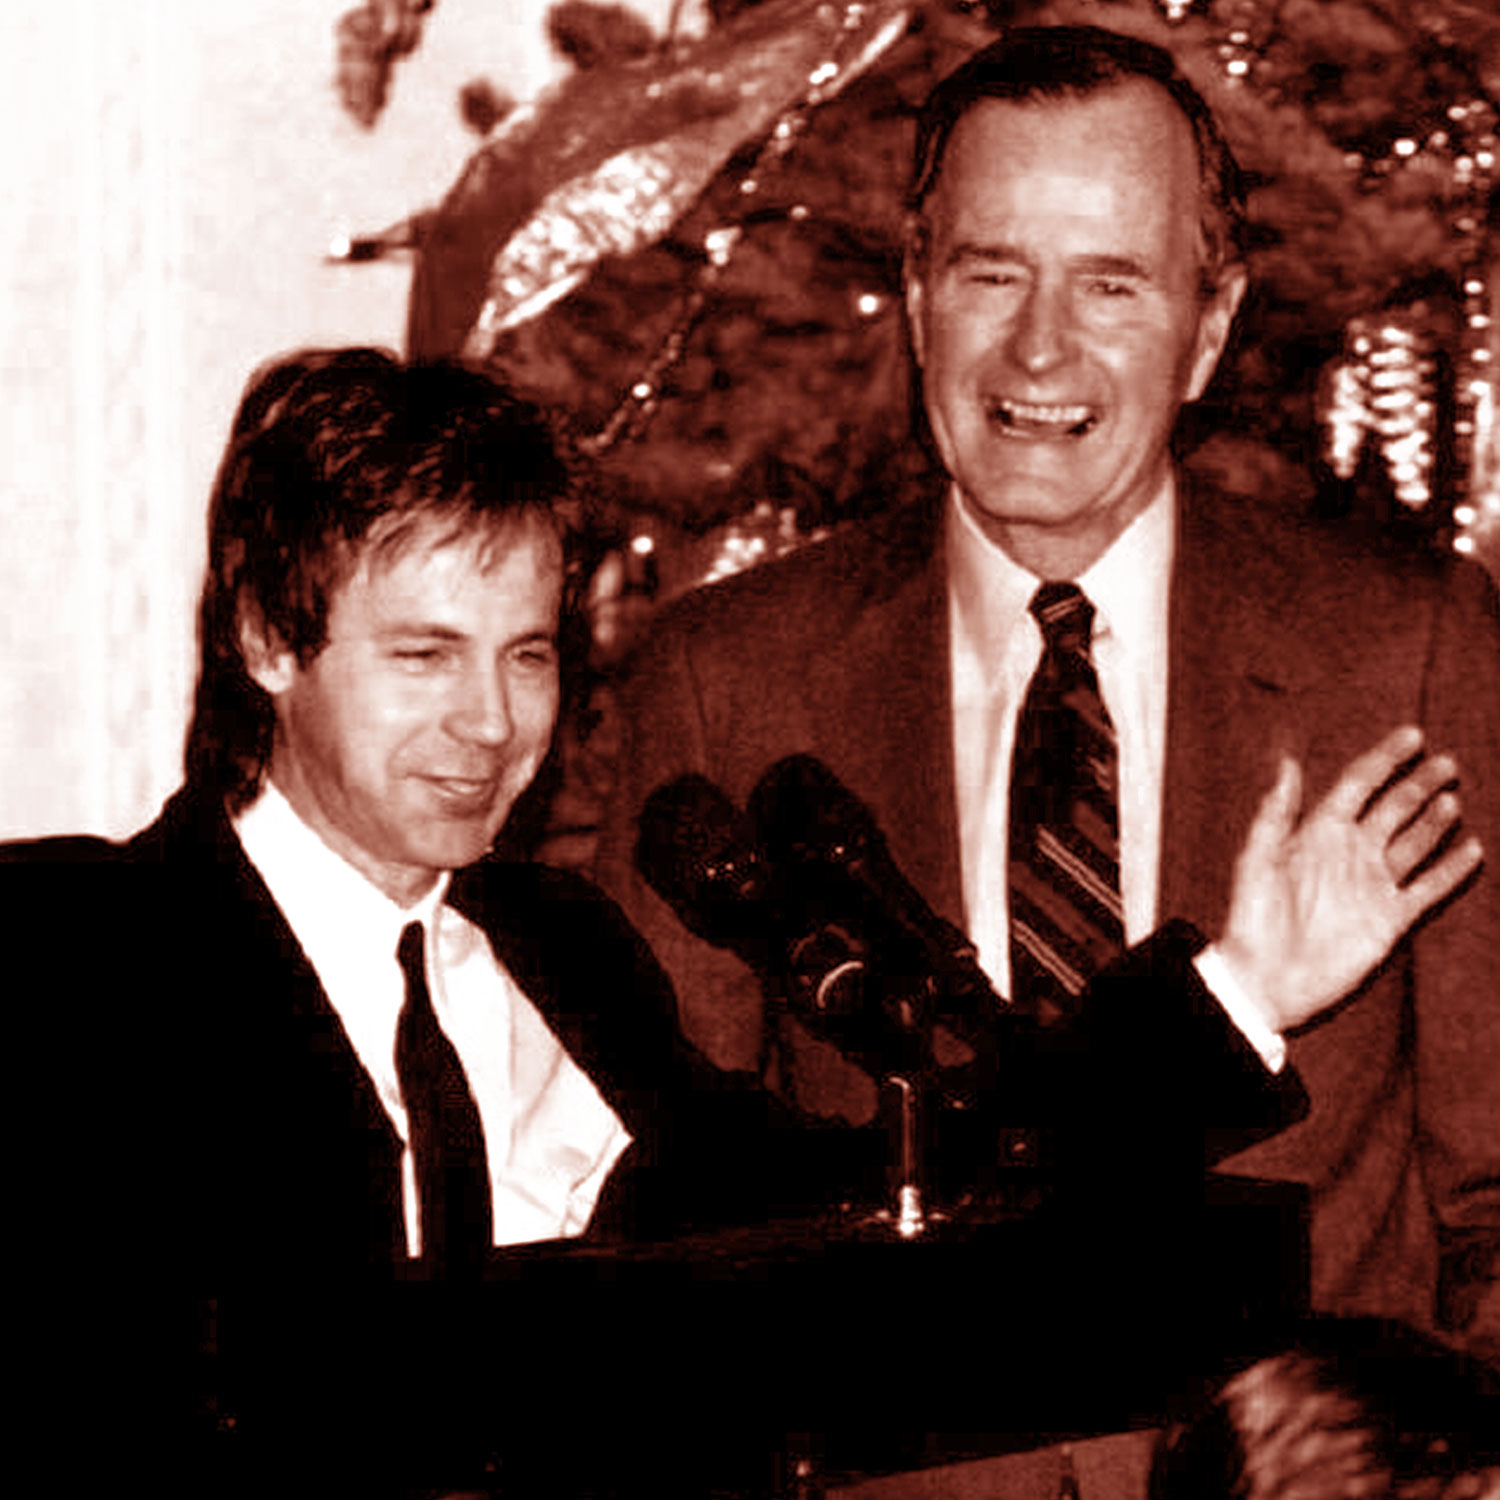 The unlikely friendship between George H.W. Bush and Dana Carvey